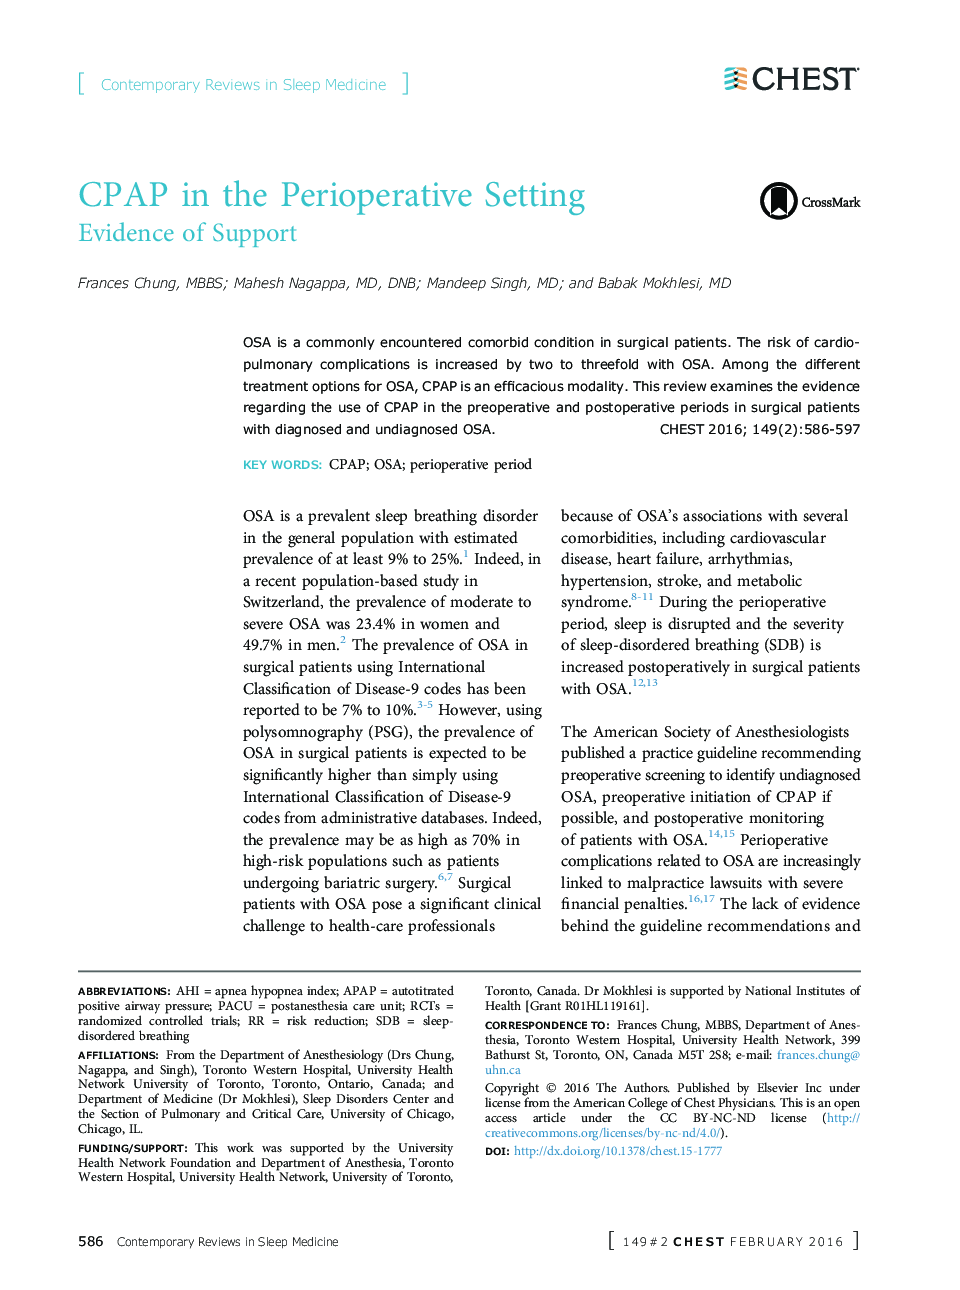 CPAP in the Perioperative Setting: Evidence of Support